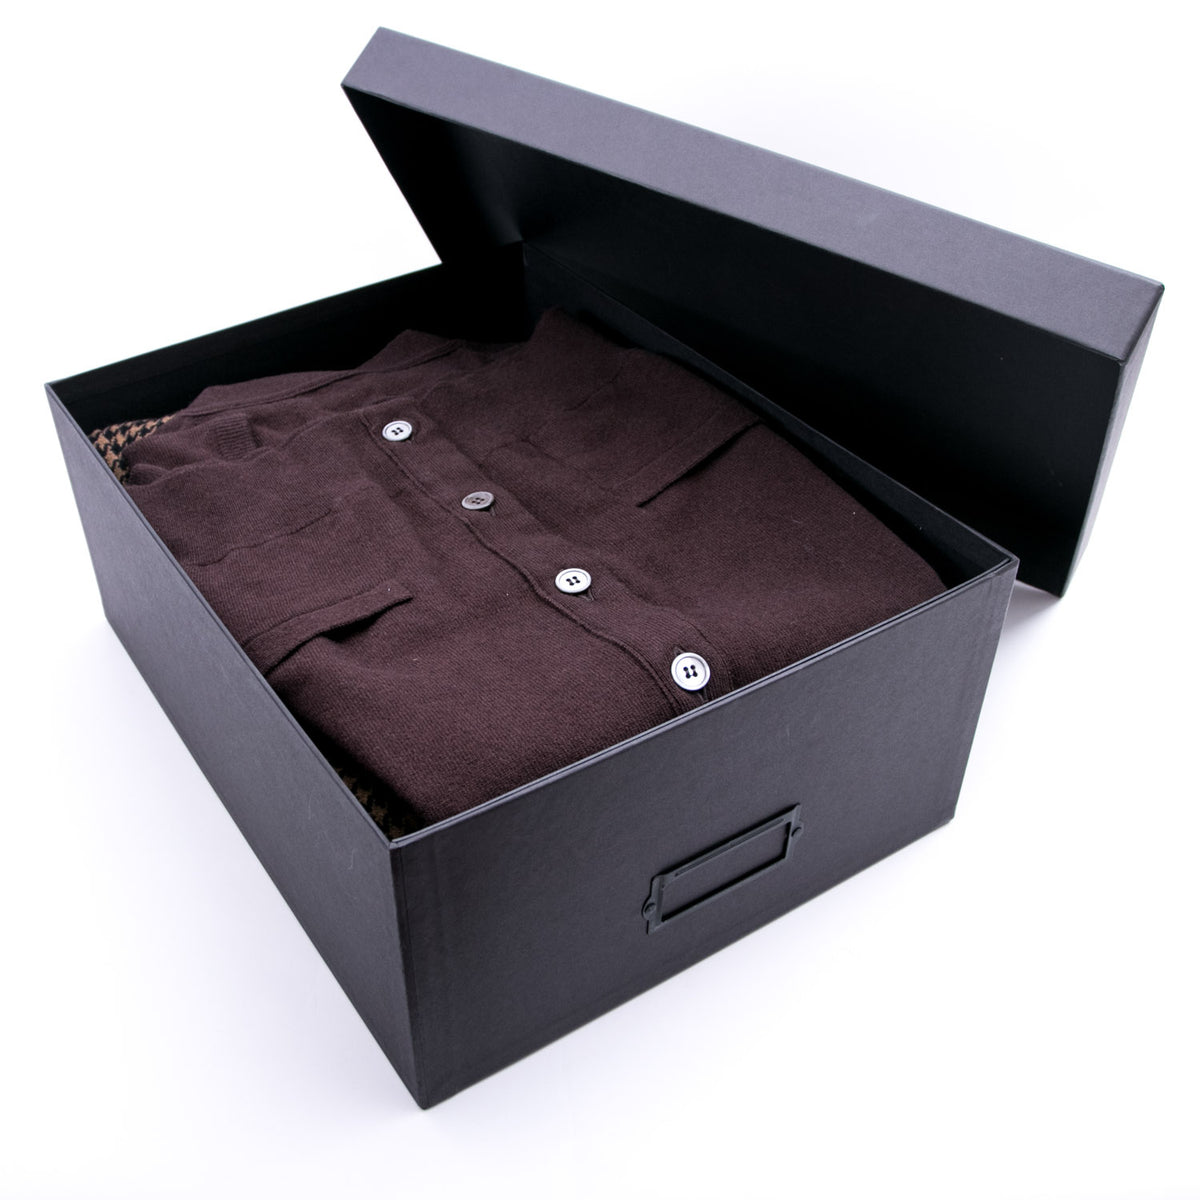 A brown Hanger Project Garment Storage Box from KirbyAllison.com with a brown shirt inside.